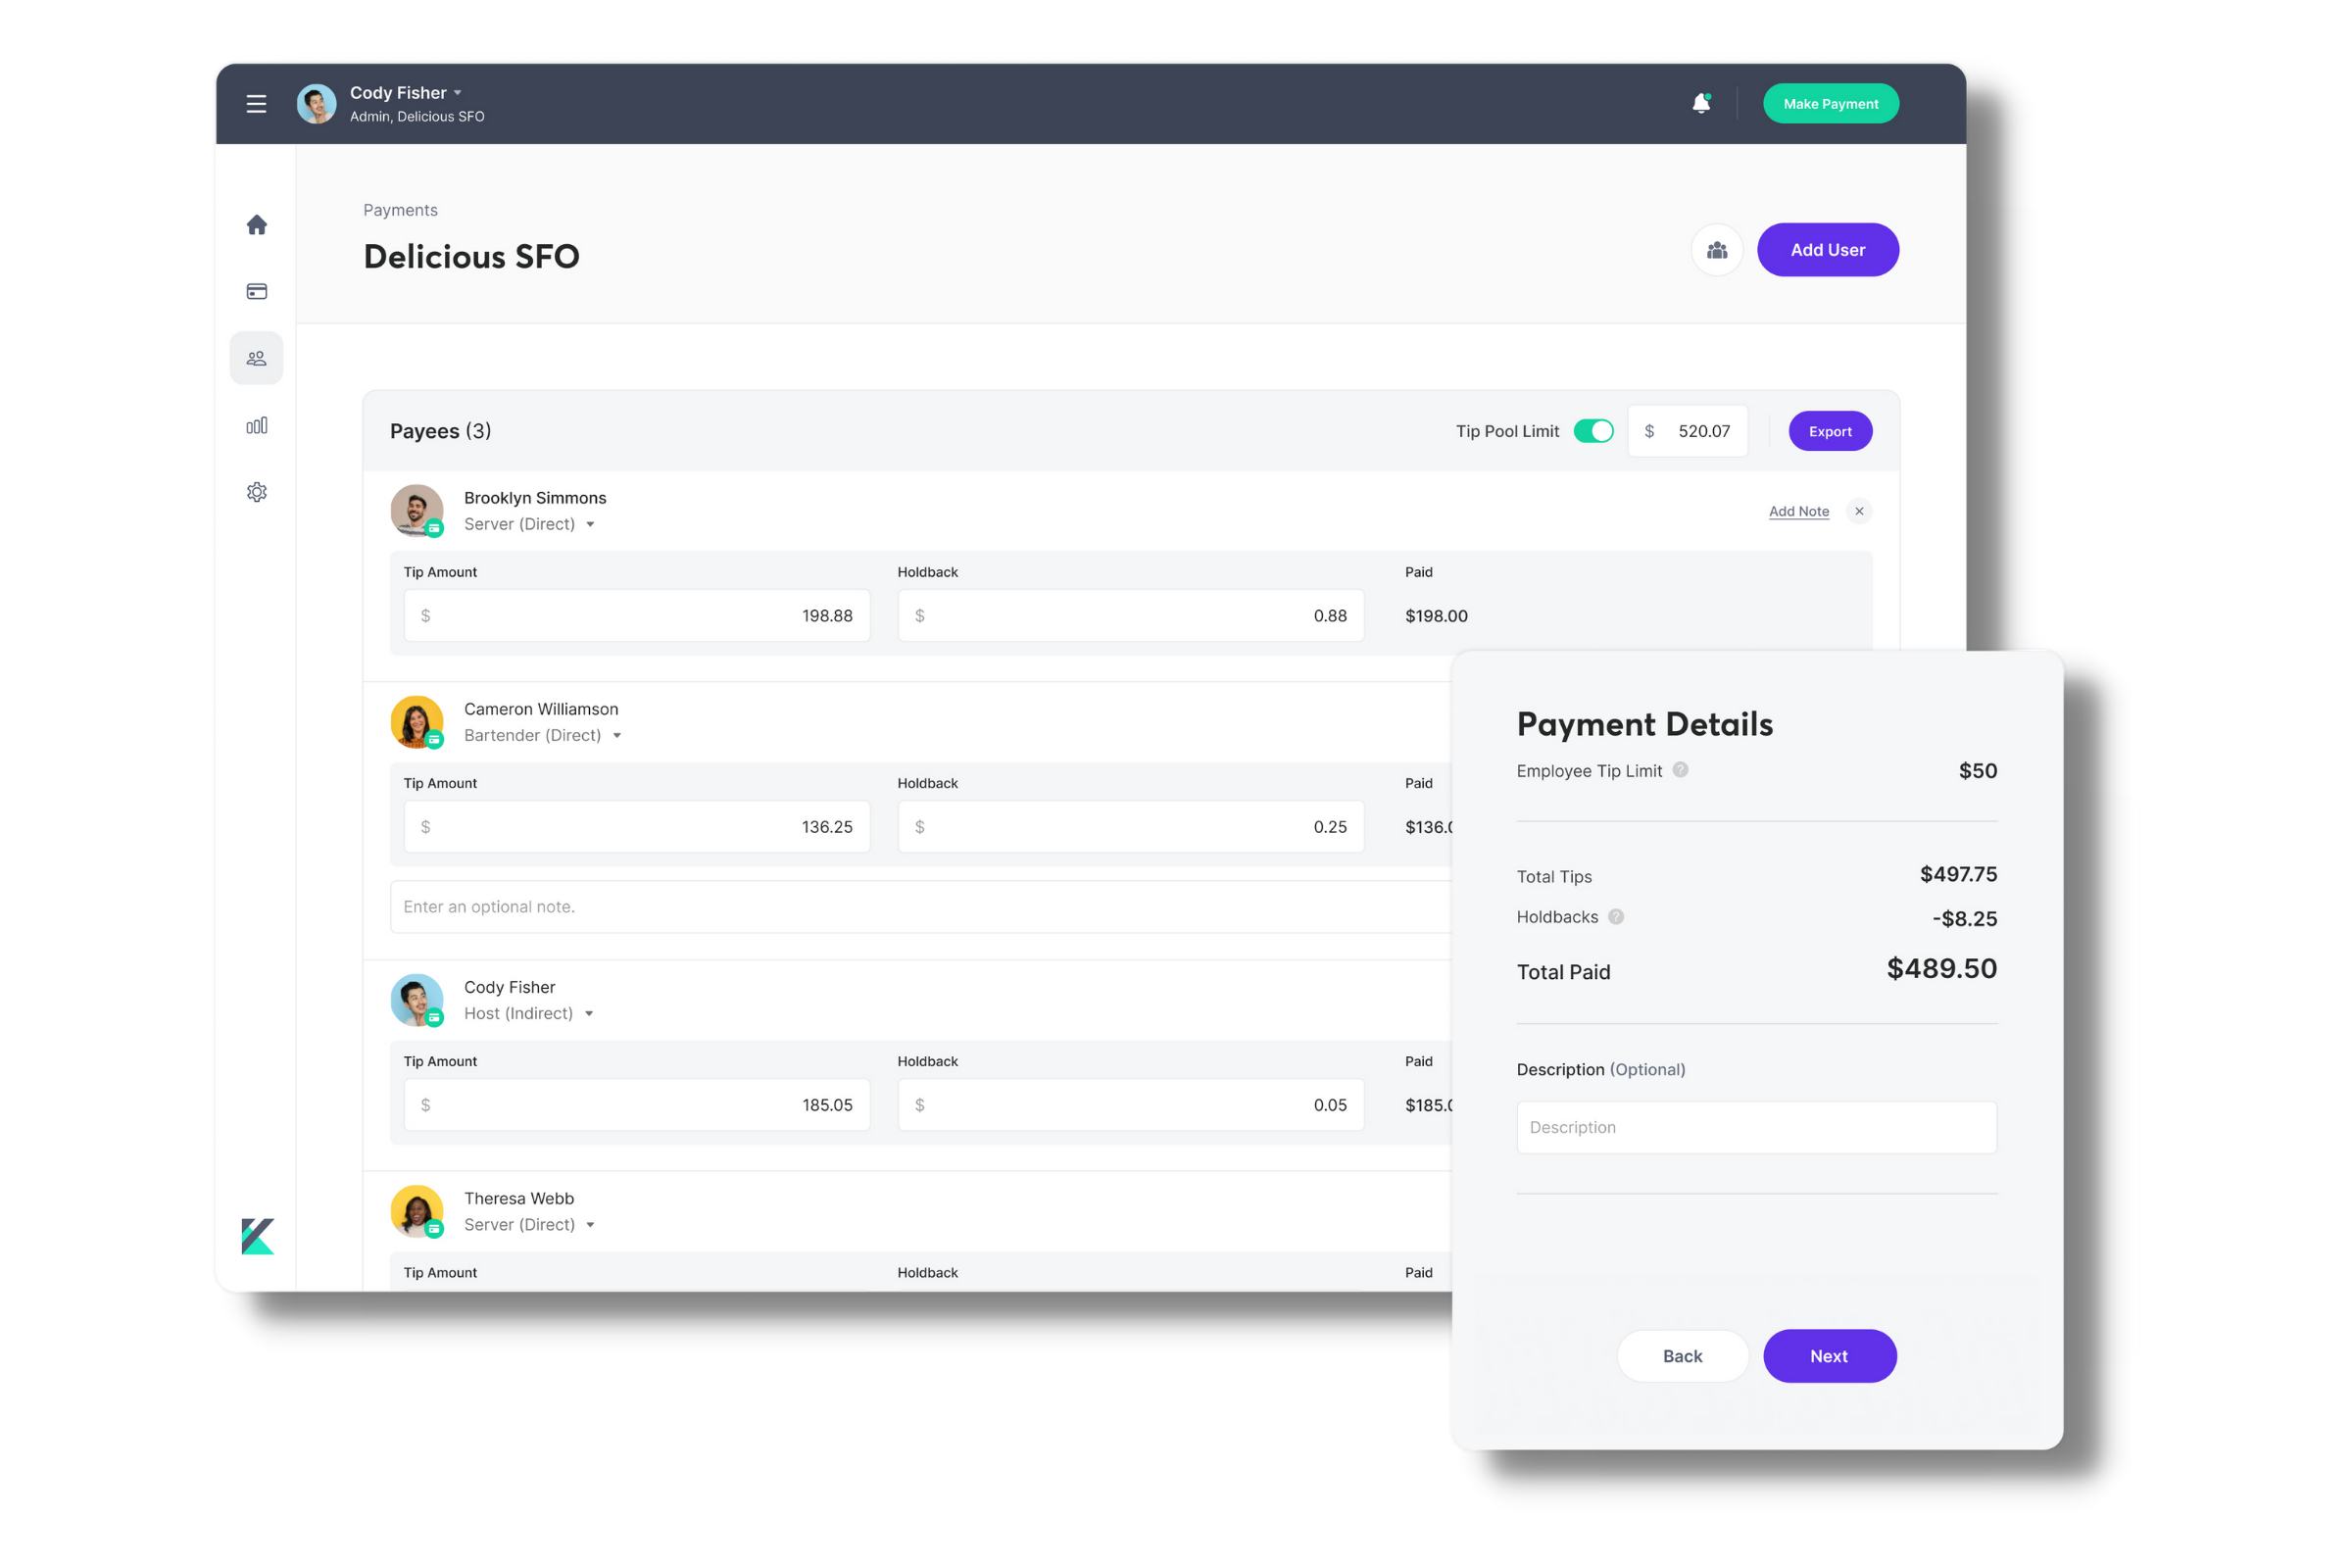 KickFin Software - Kickfin payment screen: After selecting employees to be paid, you'll enter the tip amounts, hit submit, and you're done. Payments appear in employees bank accounts in seconds.